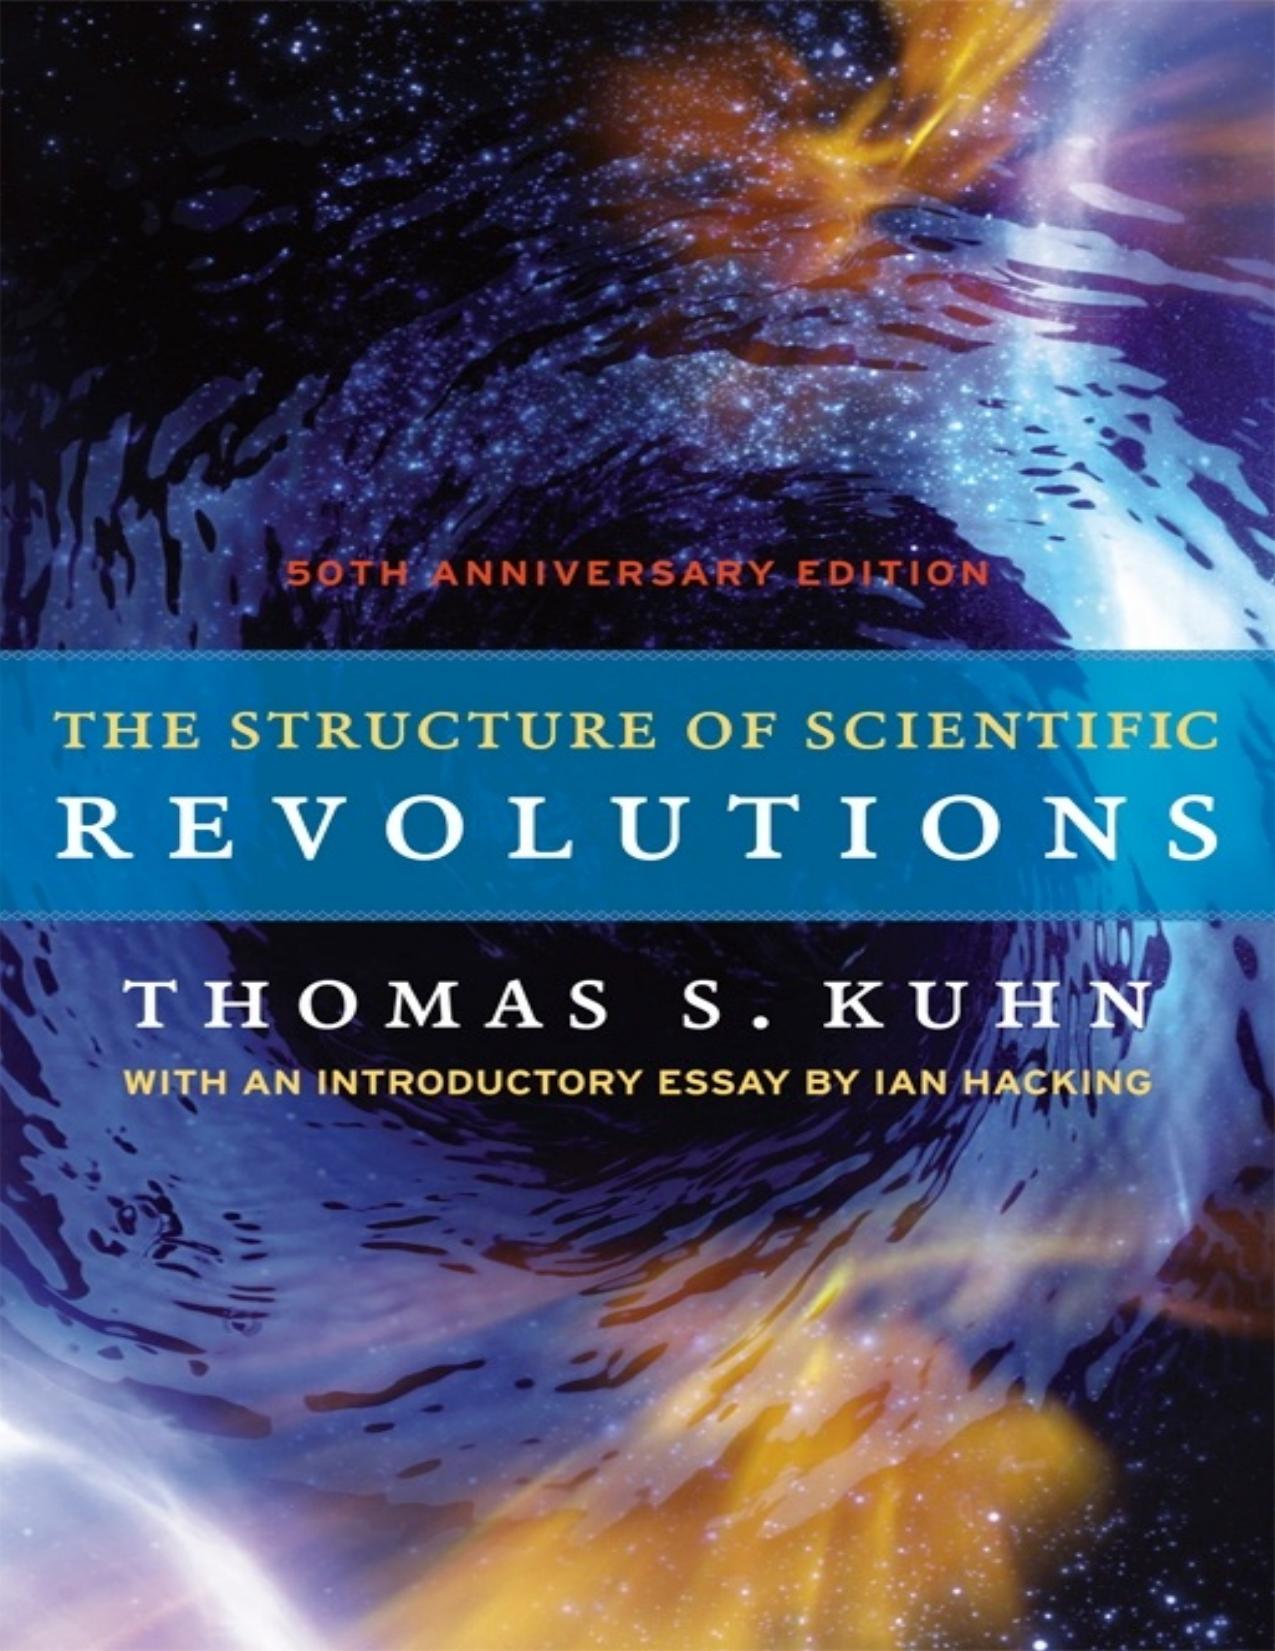 The structure of scientific revolutions: 50th anniversary edition - PDFDrive.com